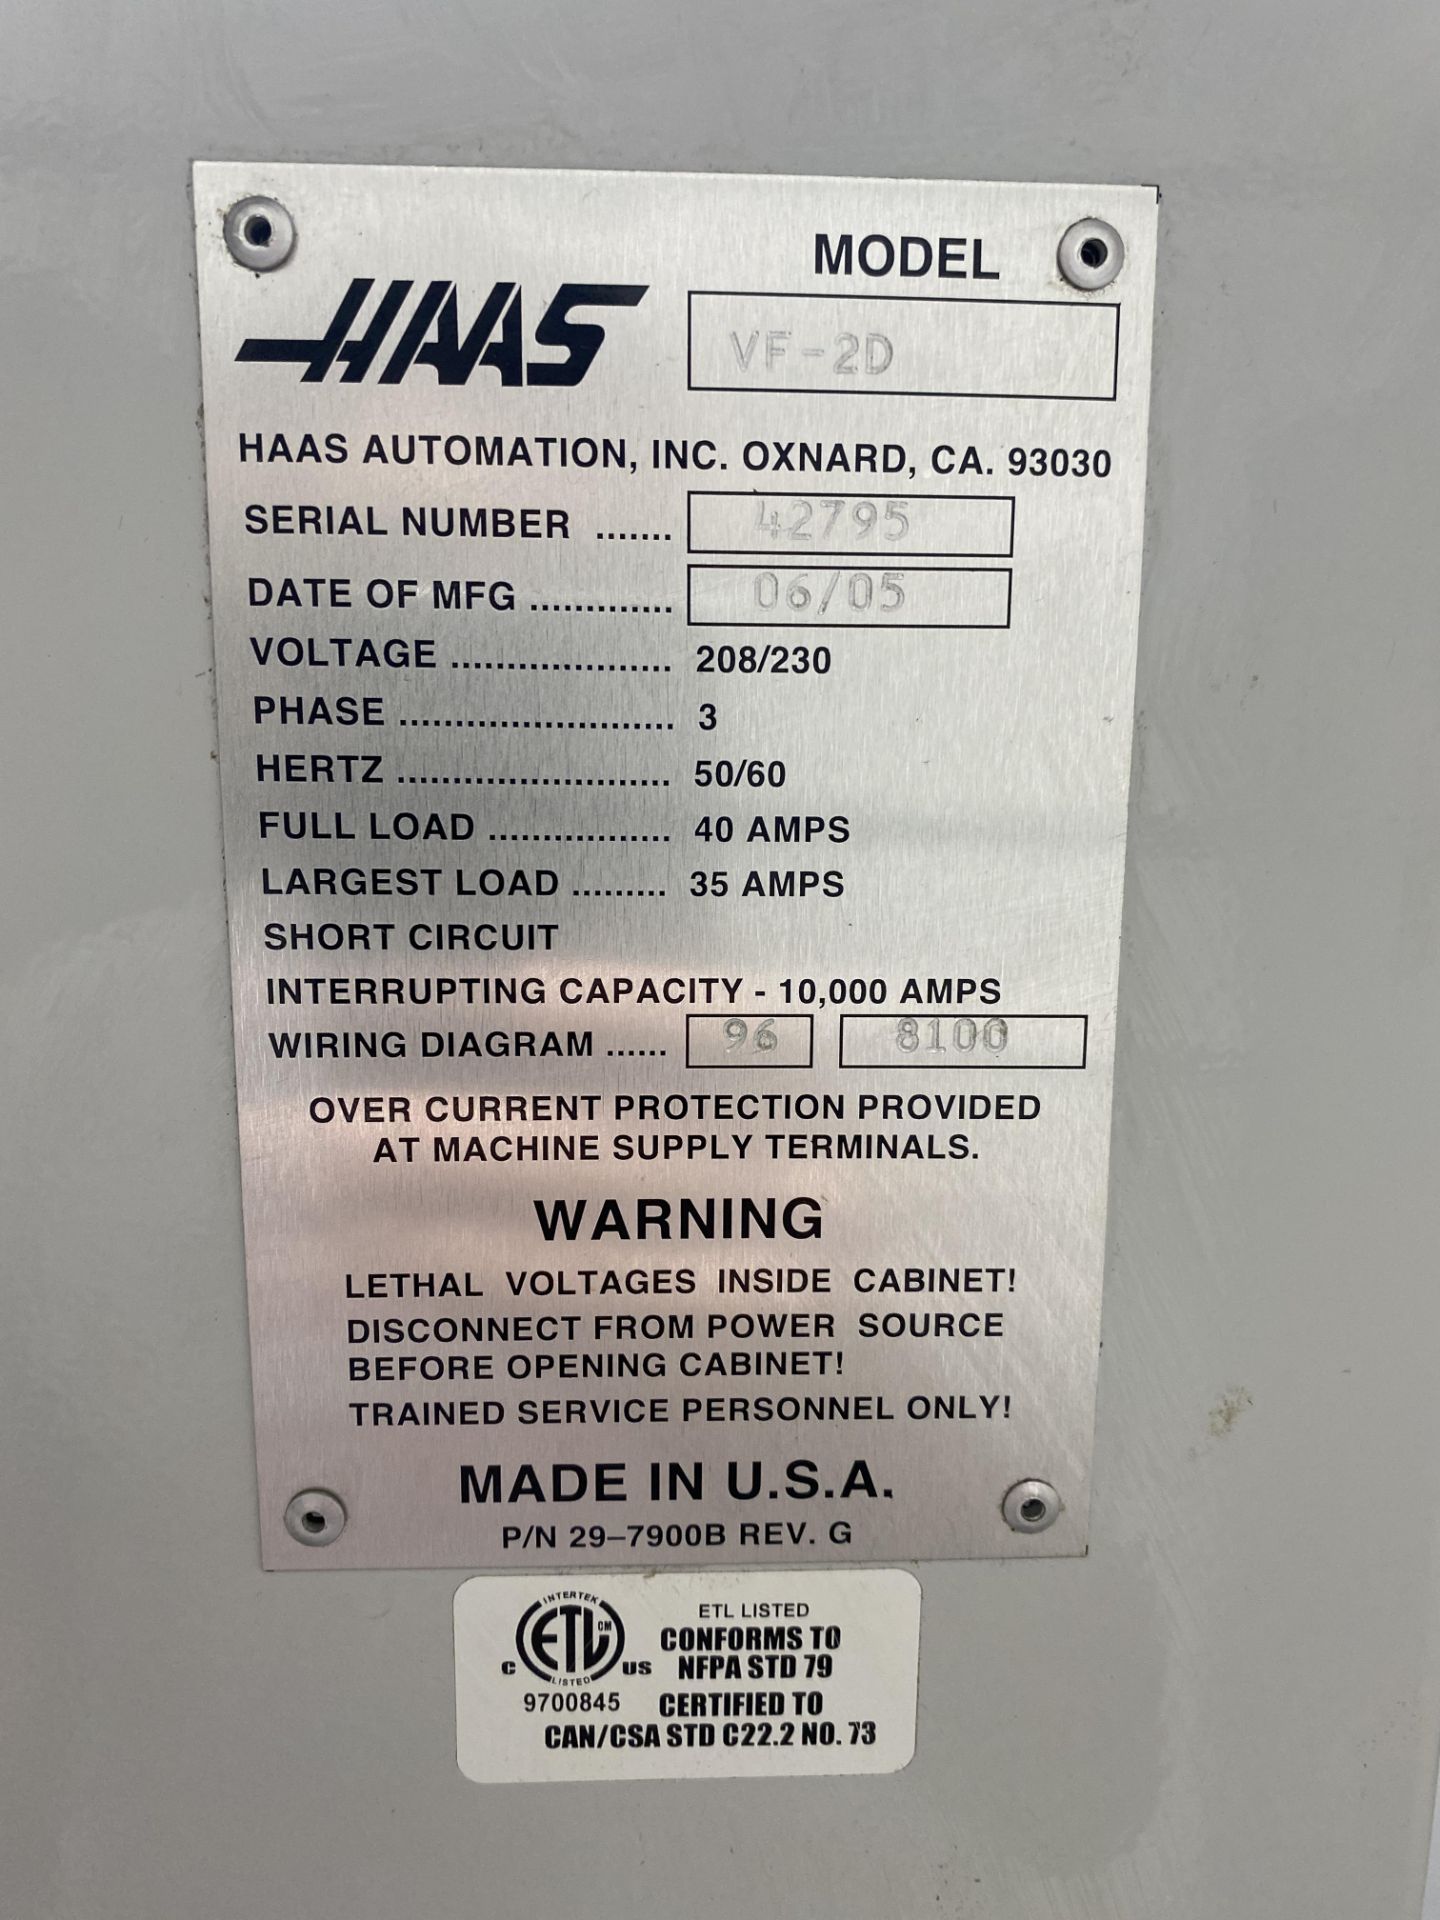 Haas 2005 VF-2D 20 HP CNC Machine, SN: 42795 with 14" x 36" T-Slot Table - Image 4 of 4